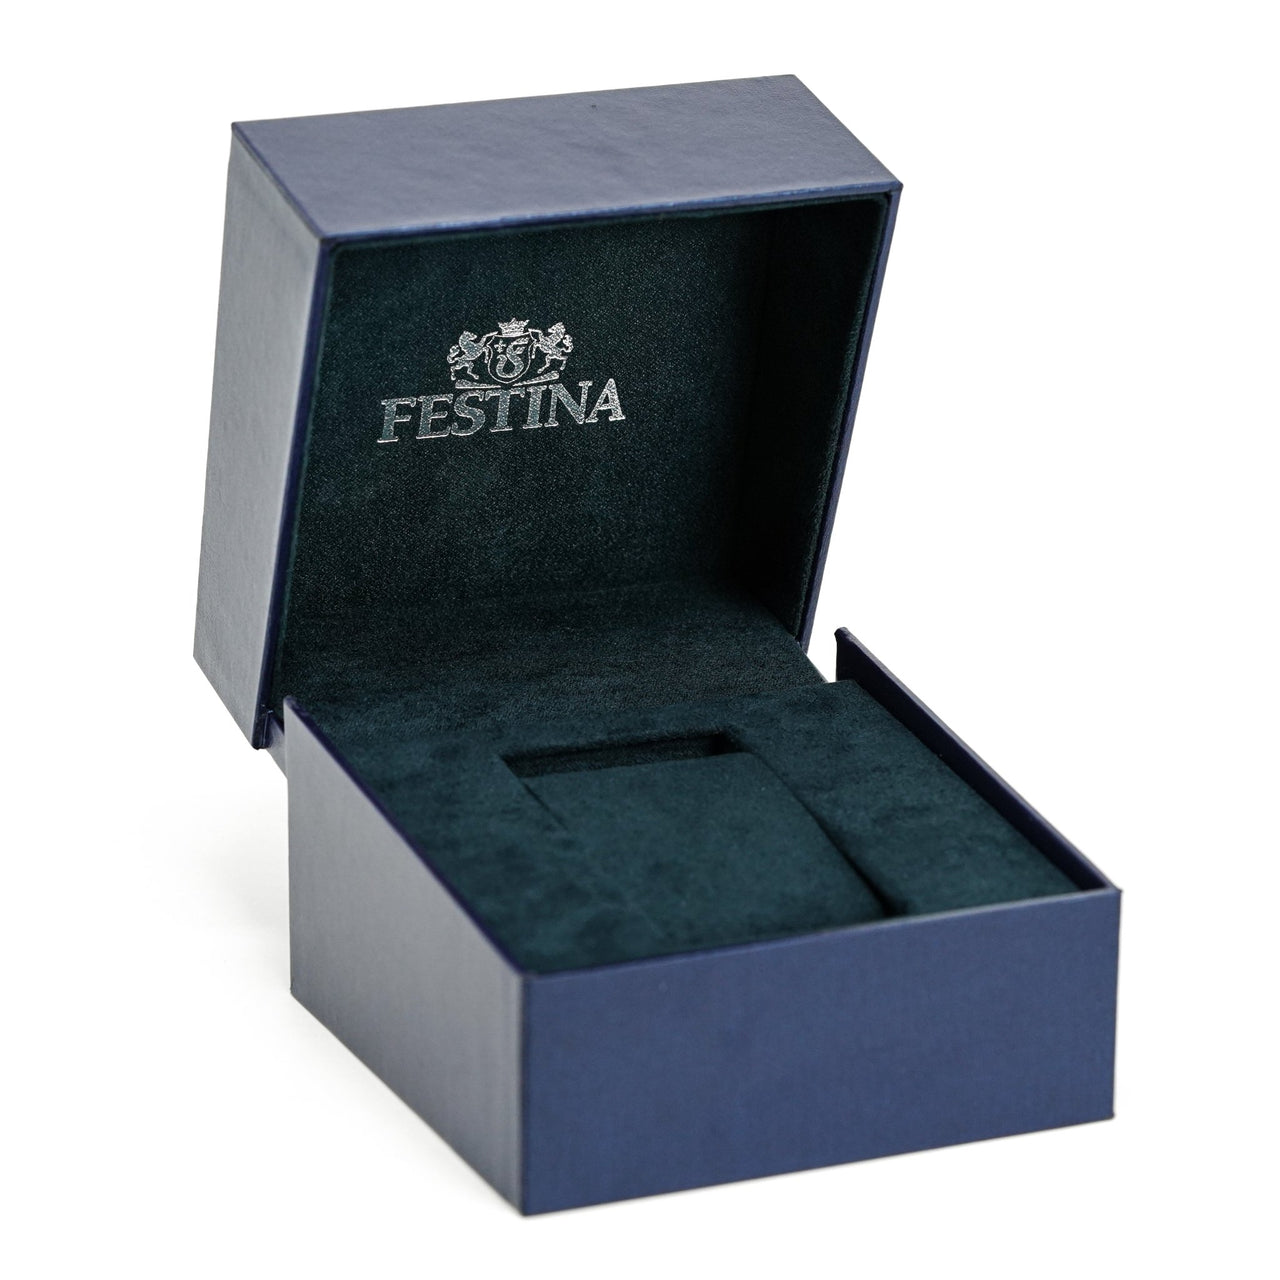 Festina Watch Blue Rose Timeless Chrono Stainless Steel F20343-9 - Watches & Crystals